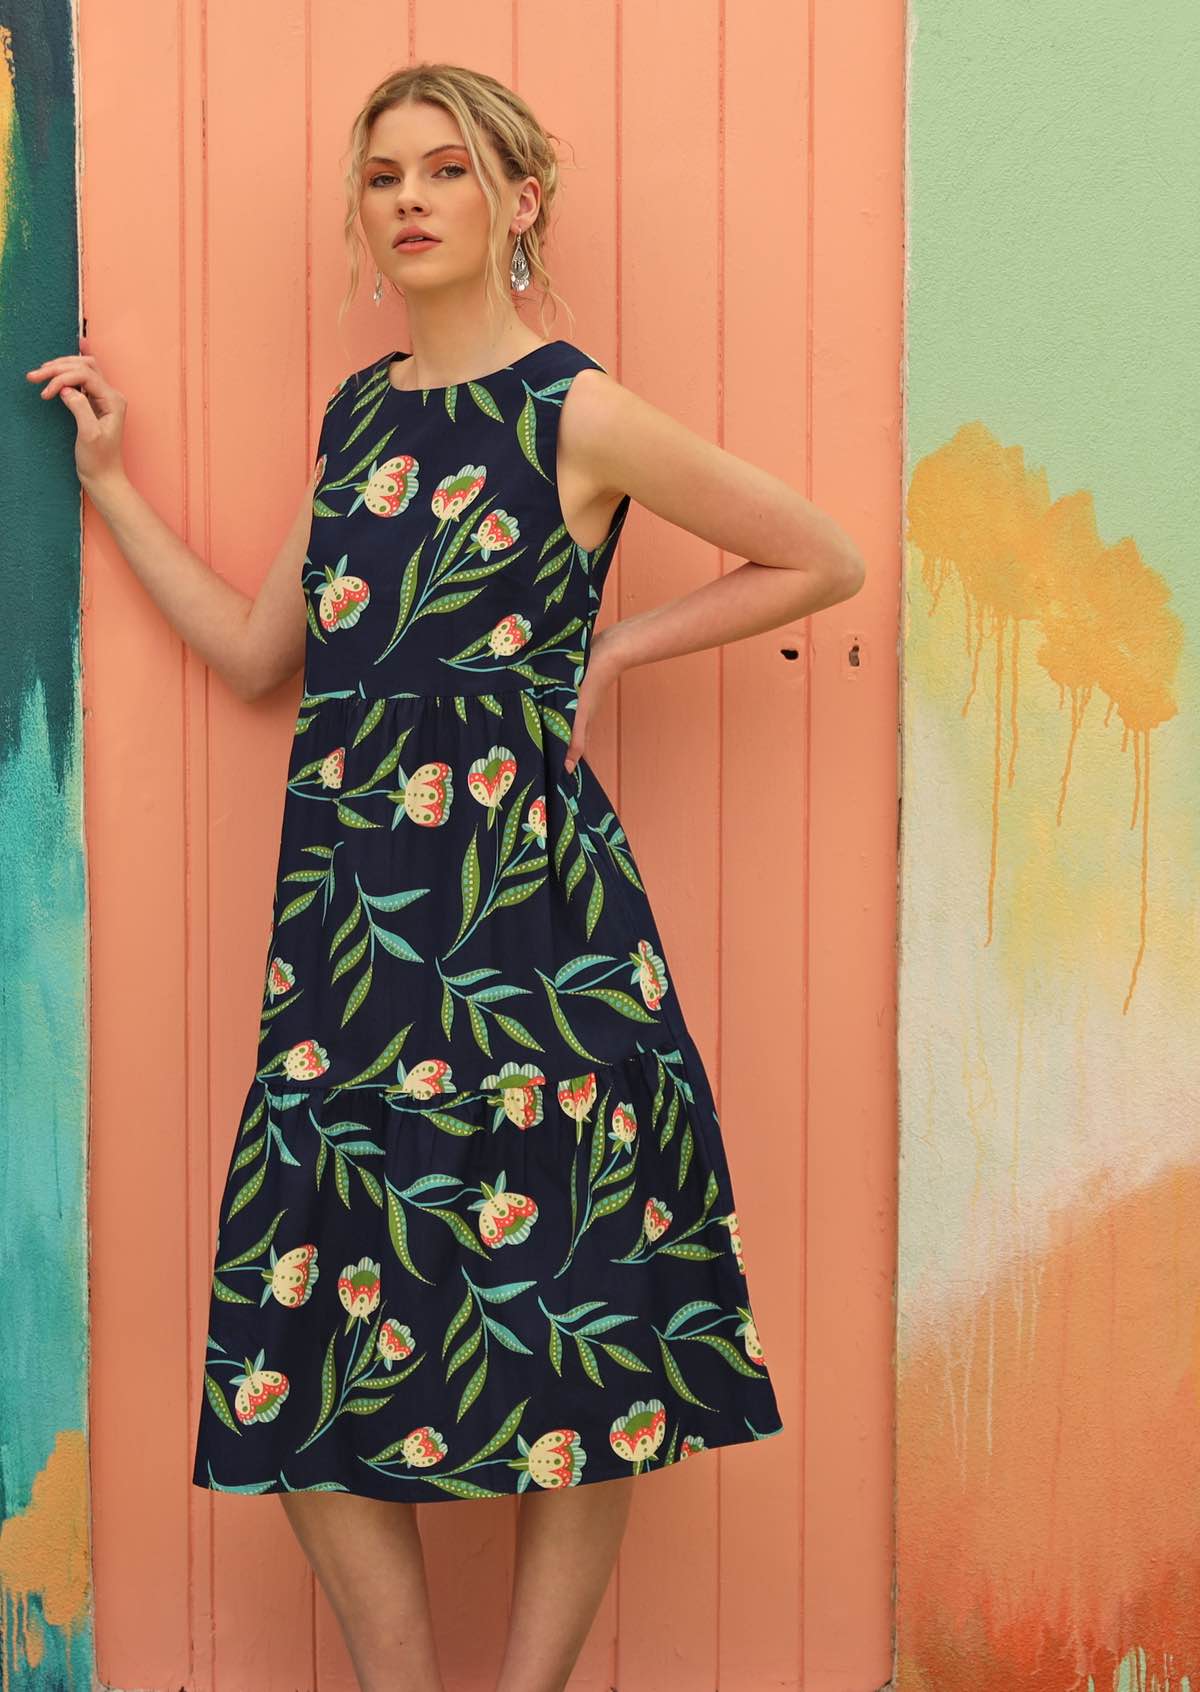 Women wears three tiered dress with floral print. 